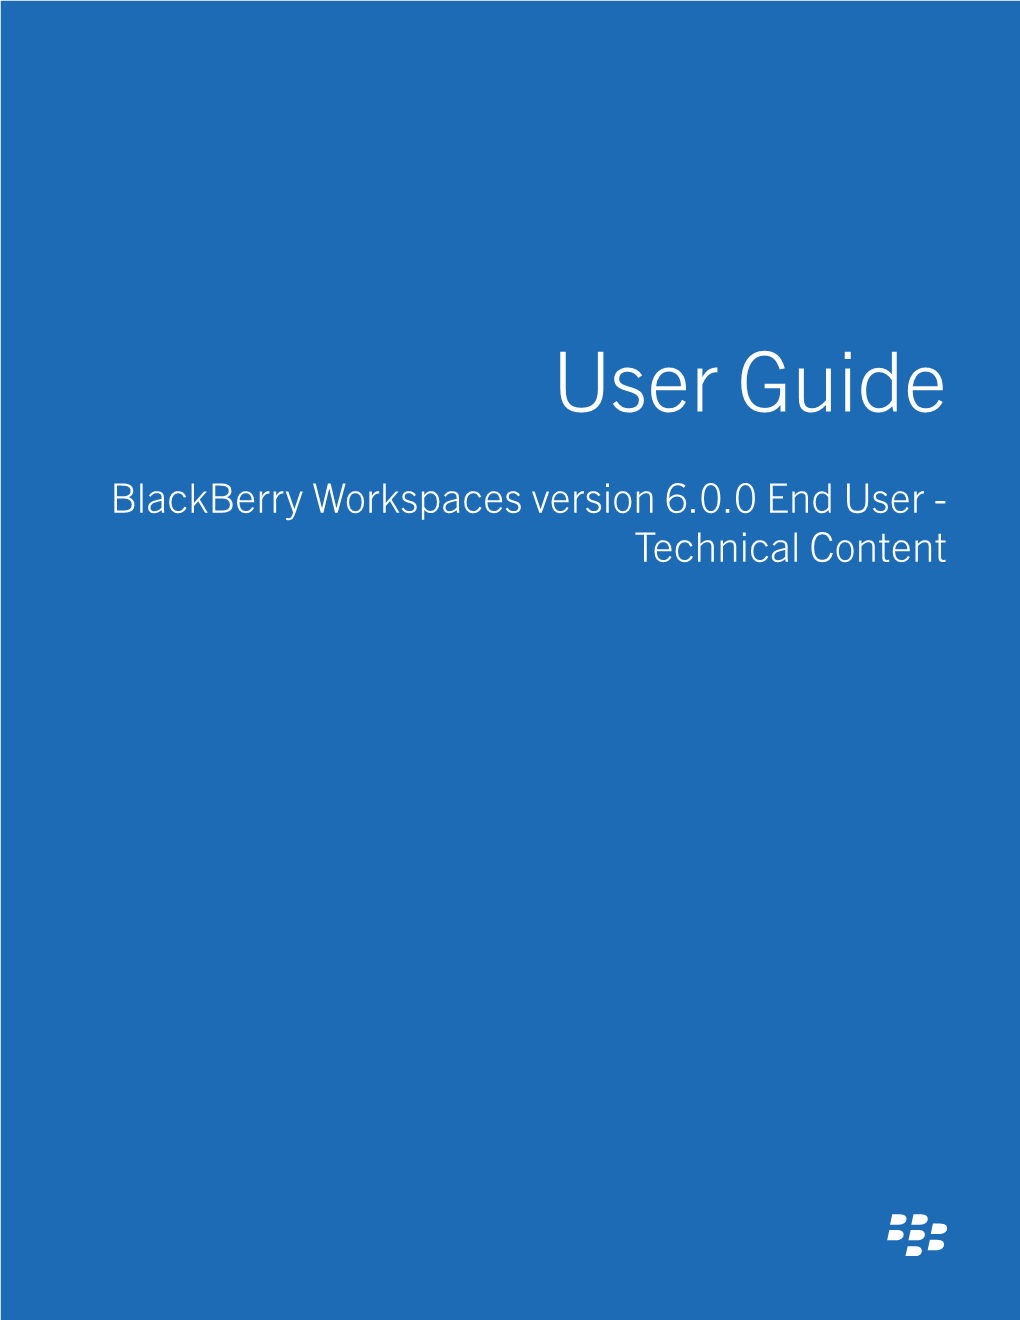 Blackberry Workspaces Version 6.0.0 End User - Technical Content Published: 2018-08-21 SWD-20180821140714306 Contents